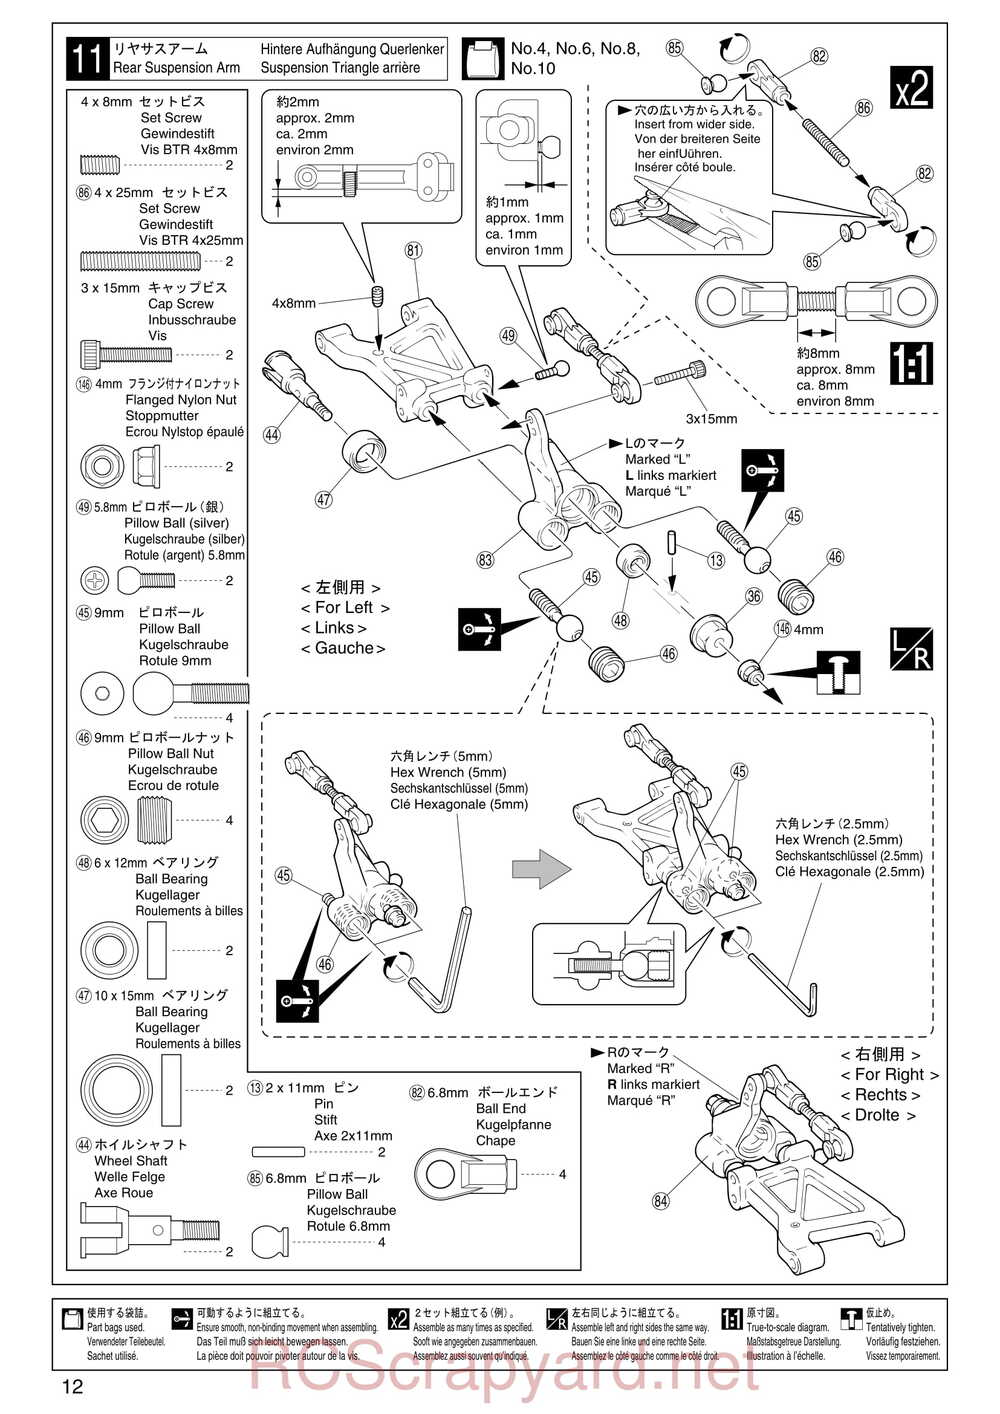 Kyosho - 31241 - V-One-S - Manual - Page 12